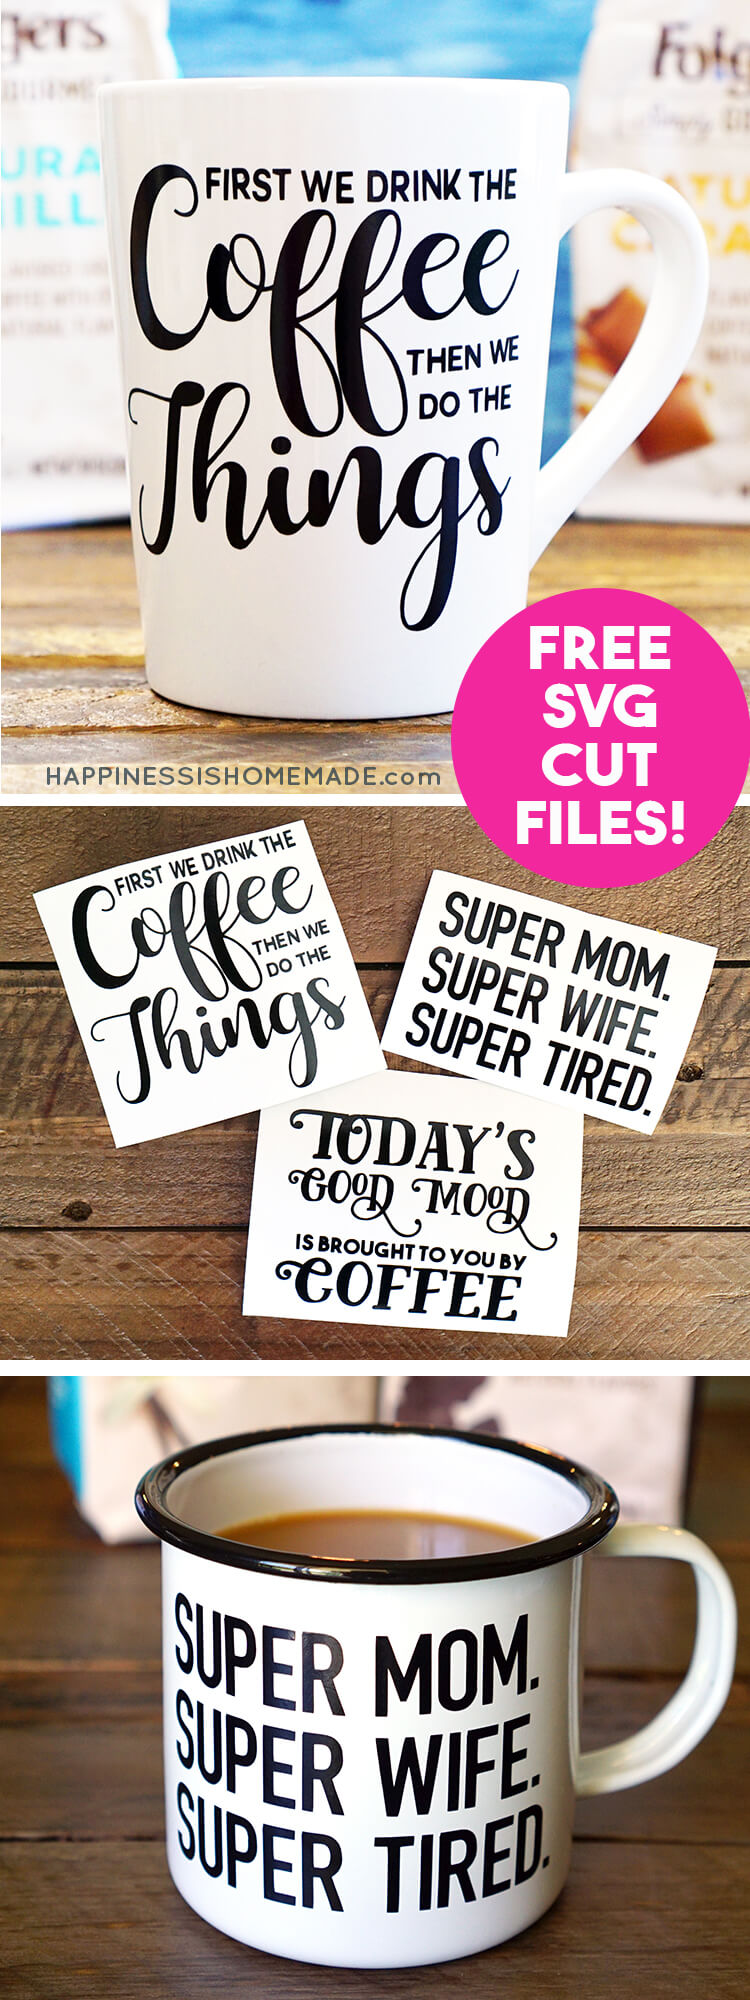 Download DIY Funny Coffee Mugs + Free SVG Cut Files - Happiness is Homemade